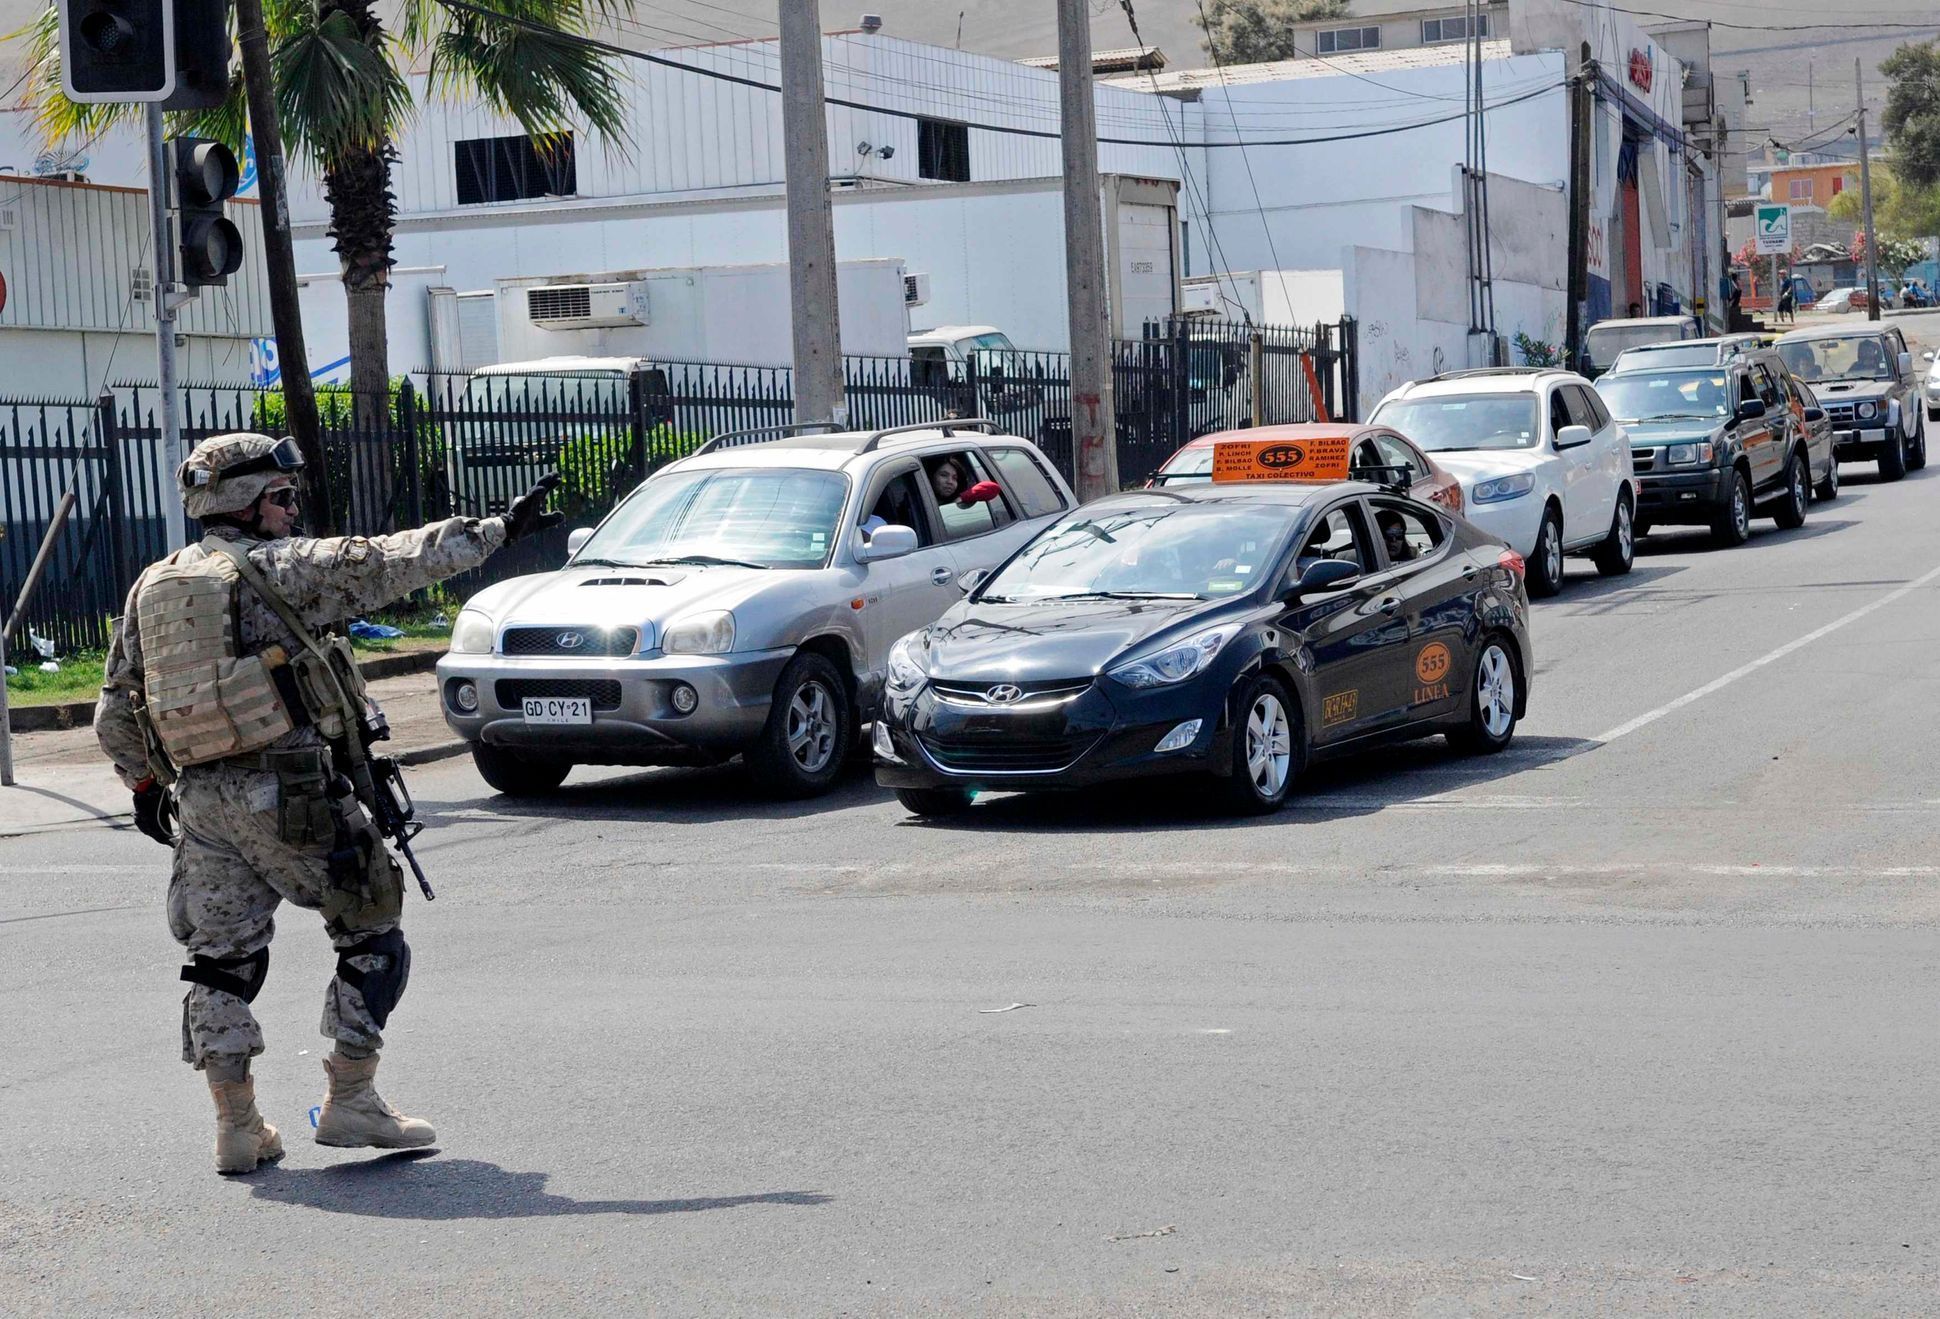 A soldier maintains order as dozens of cars lined up to buy fuel in Iquique